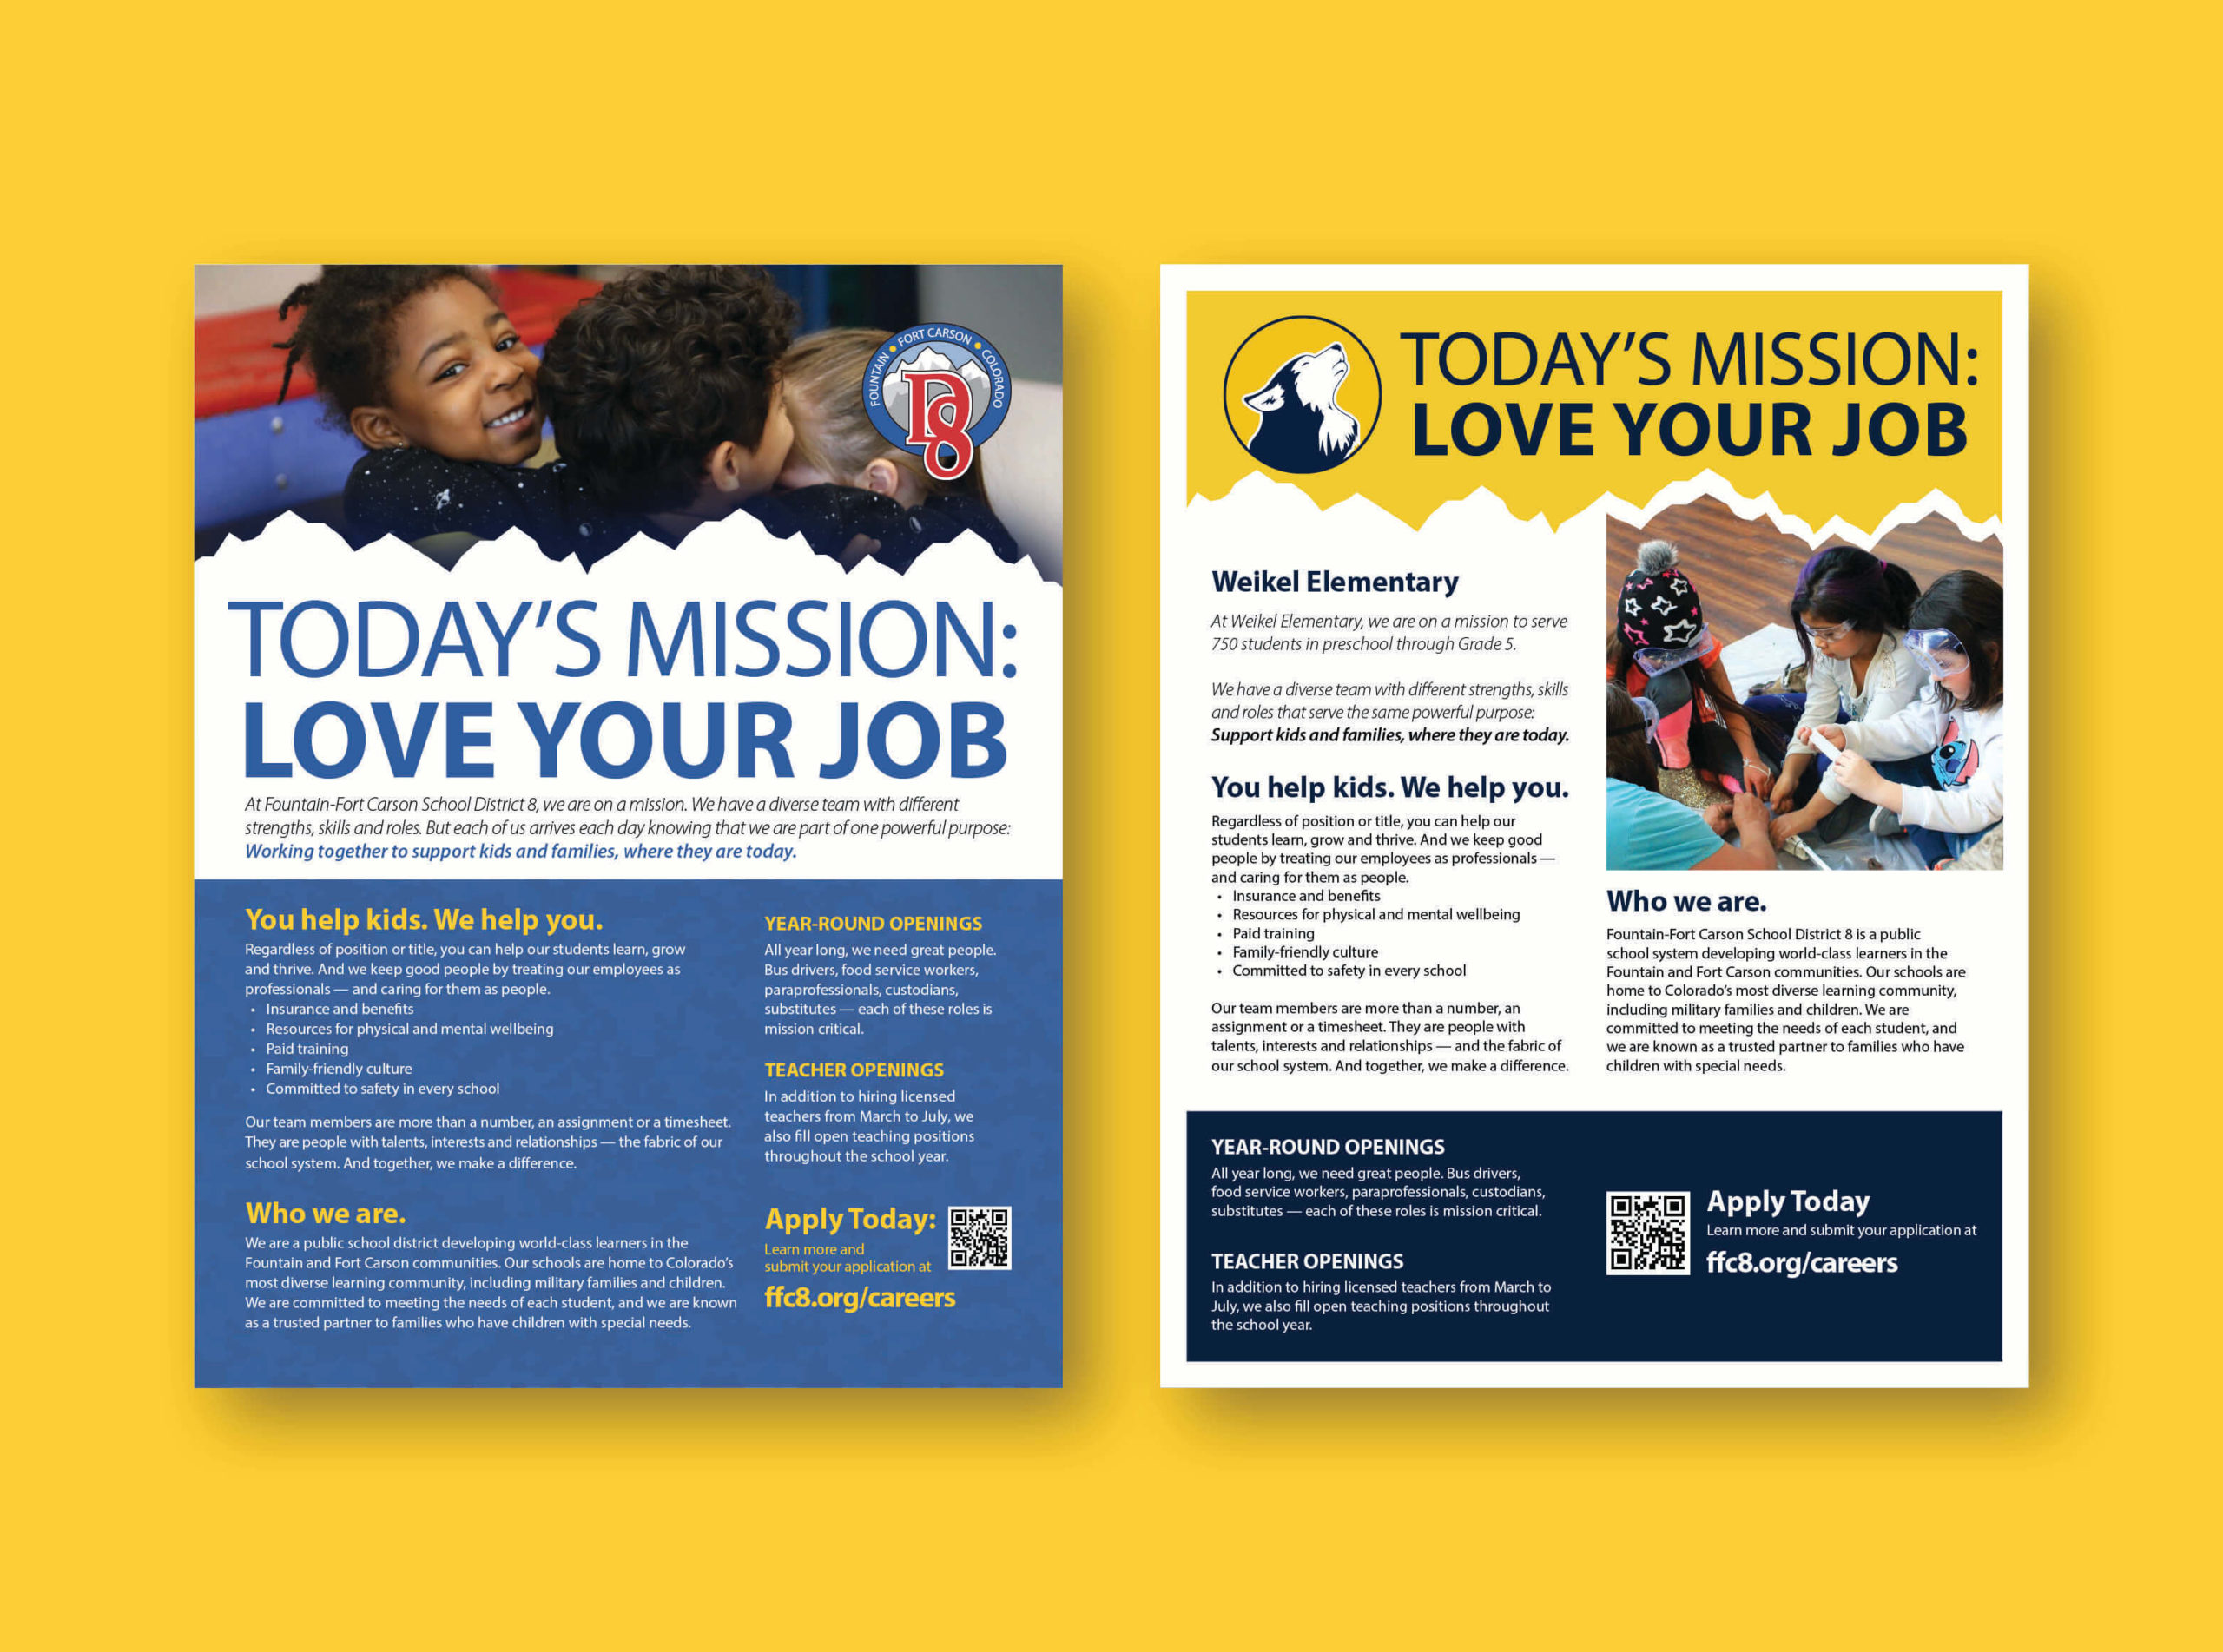 flyers for hiring campaign today's mission: love your job, 1 for district and 1 for individual school weikel elementary